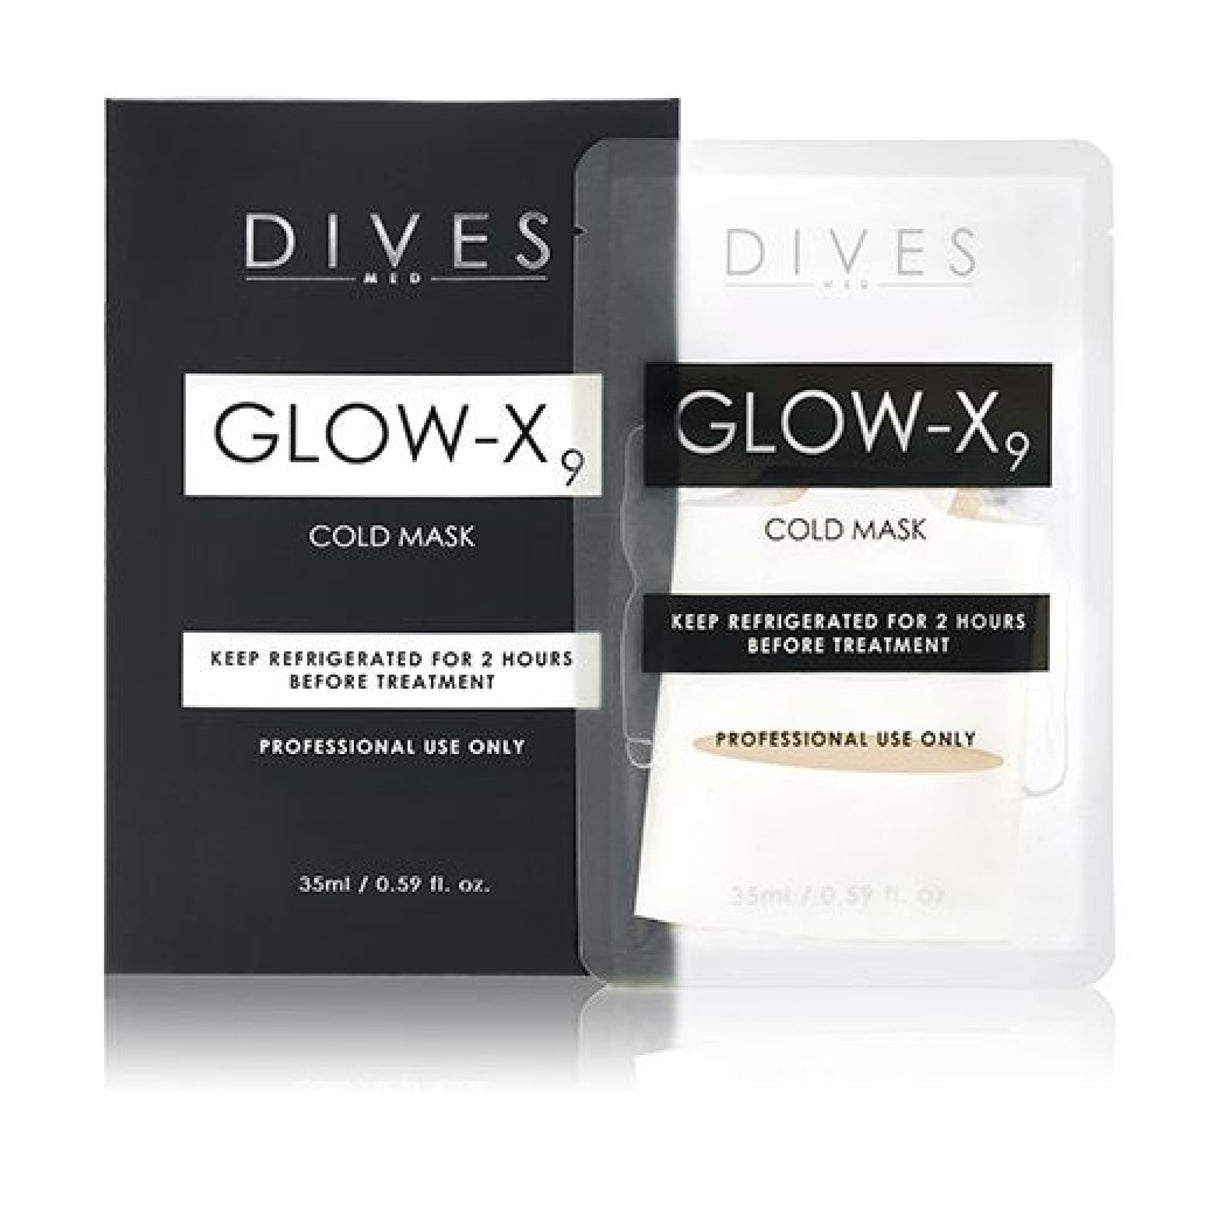 Glow-x9 Cold Mask - Filler Lux™